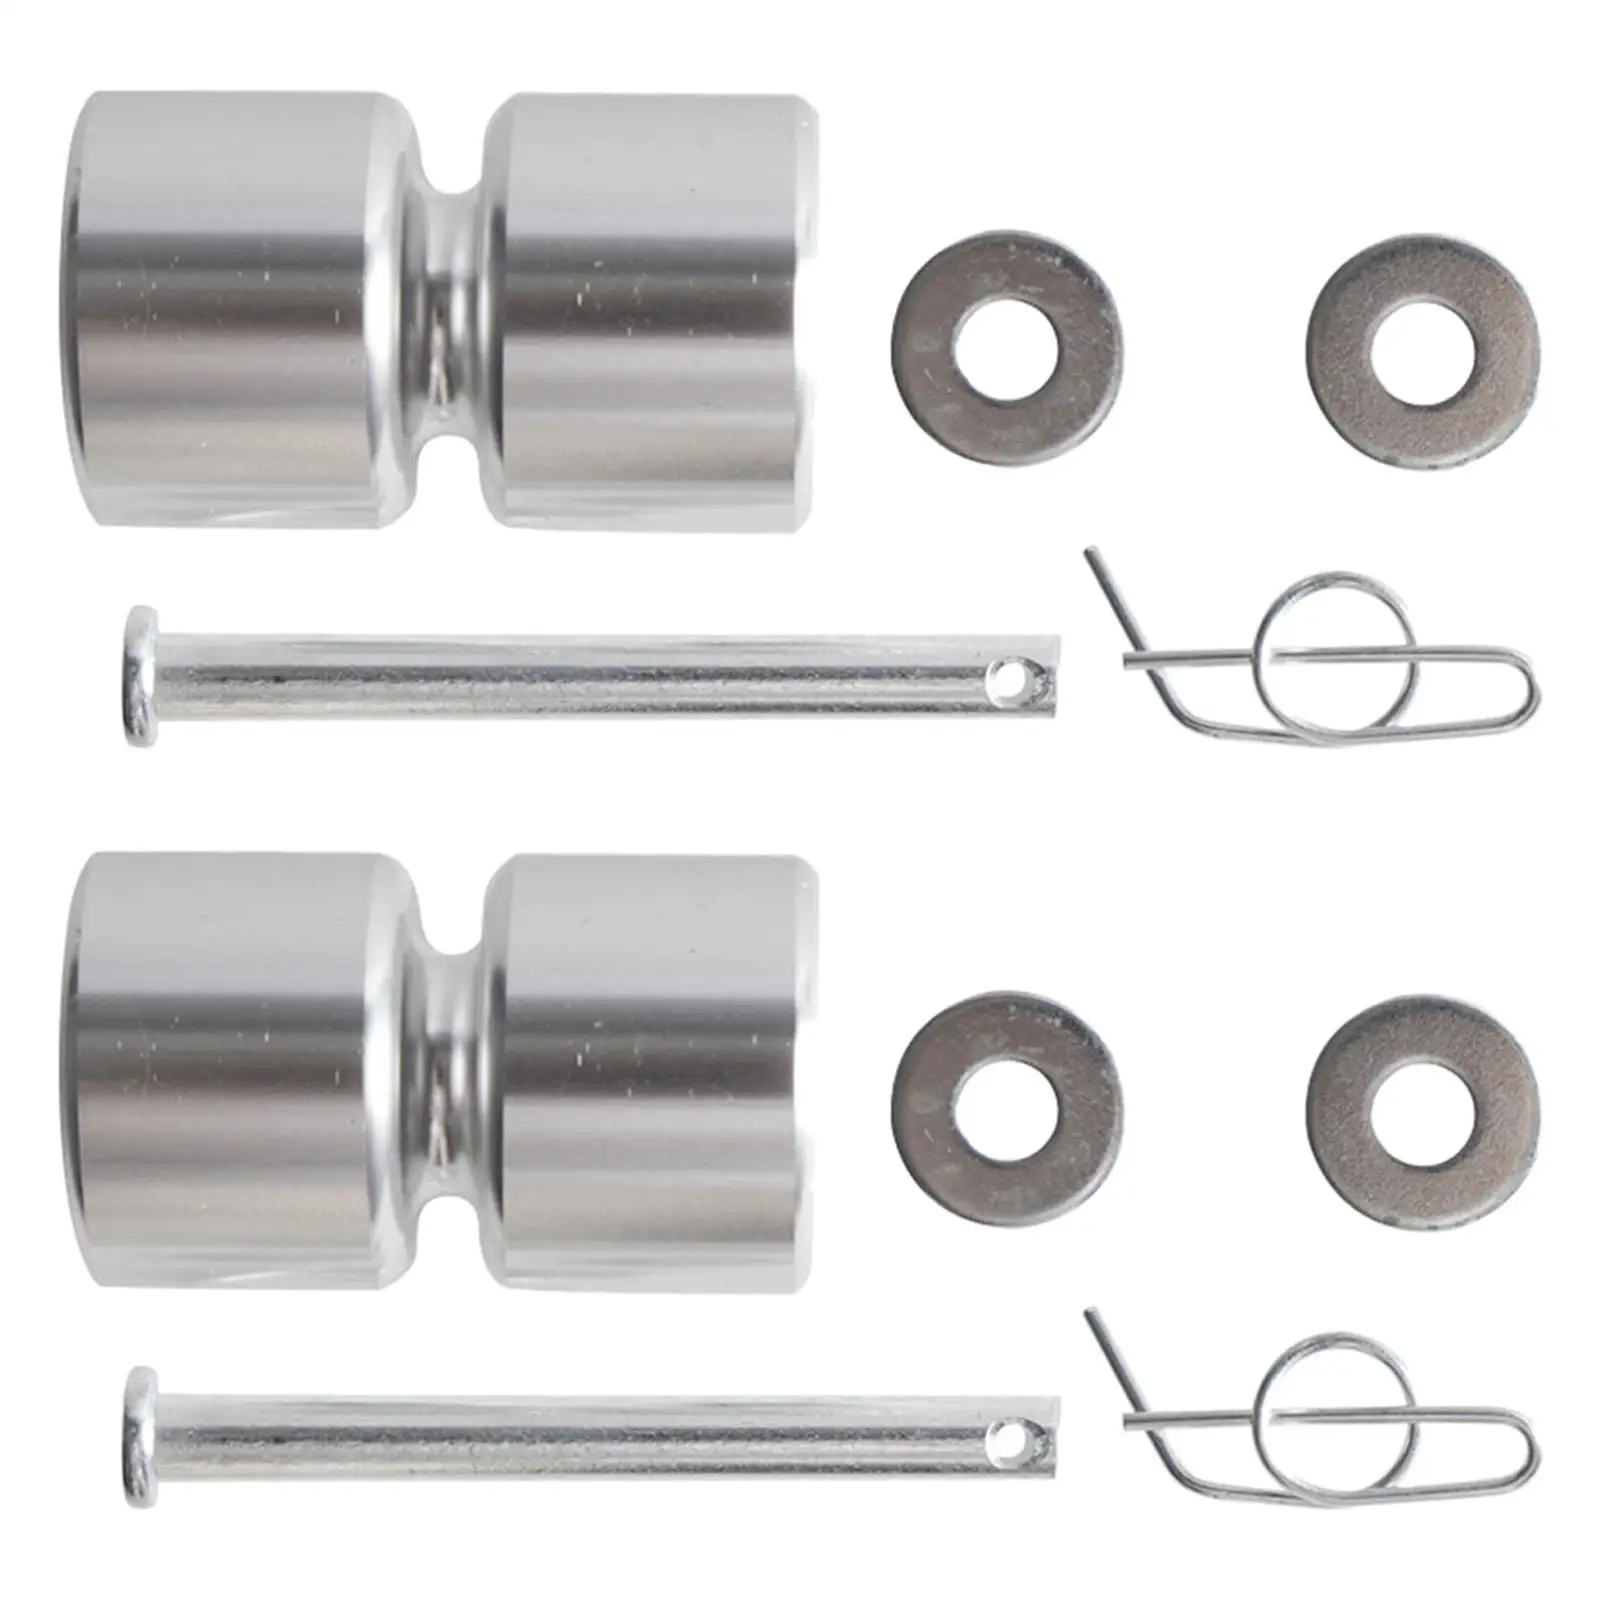 Durable Trailer Tailgate Lift Assist Rollers Kit Fittings for Tailgate